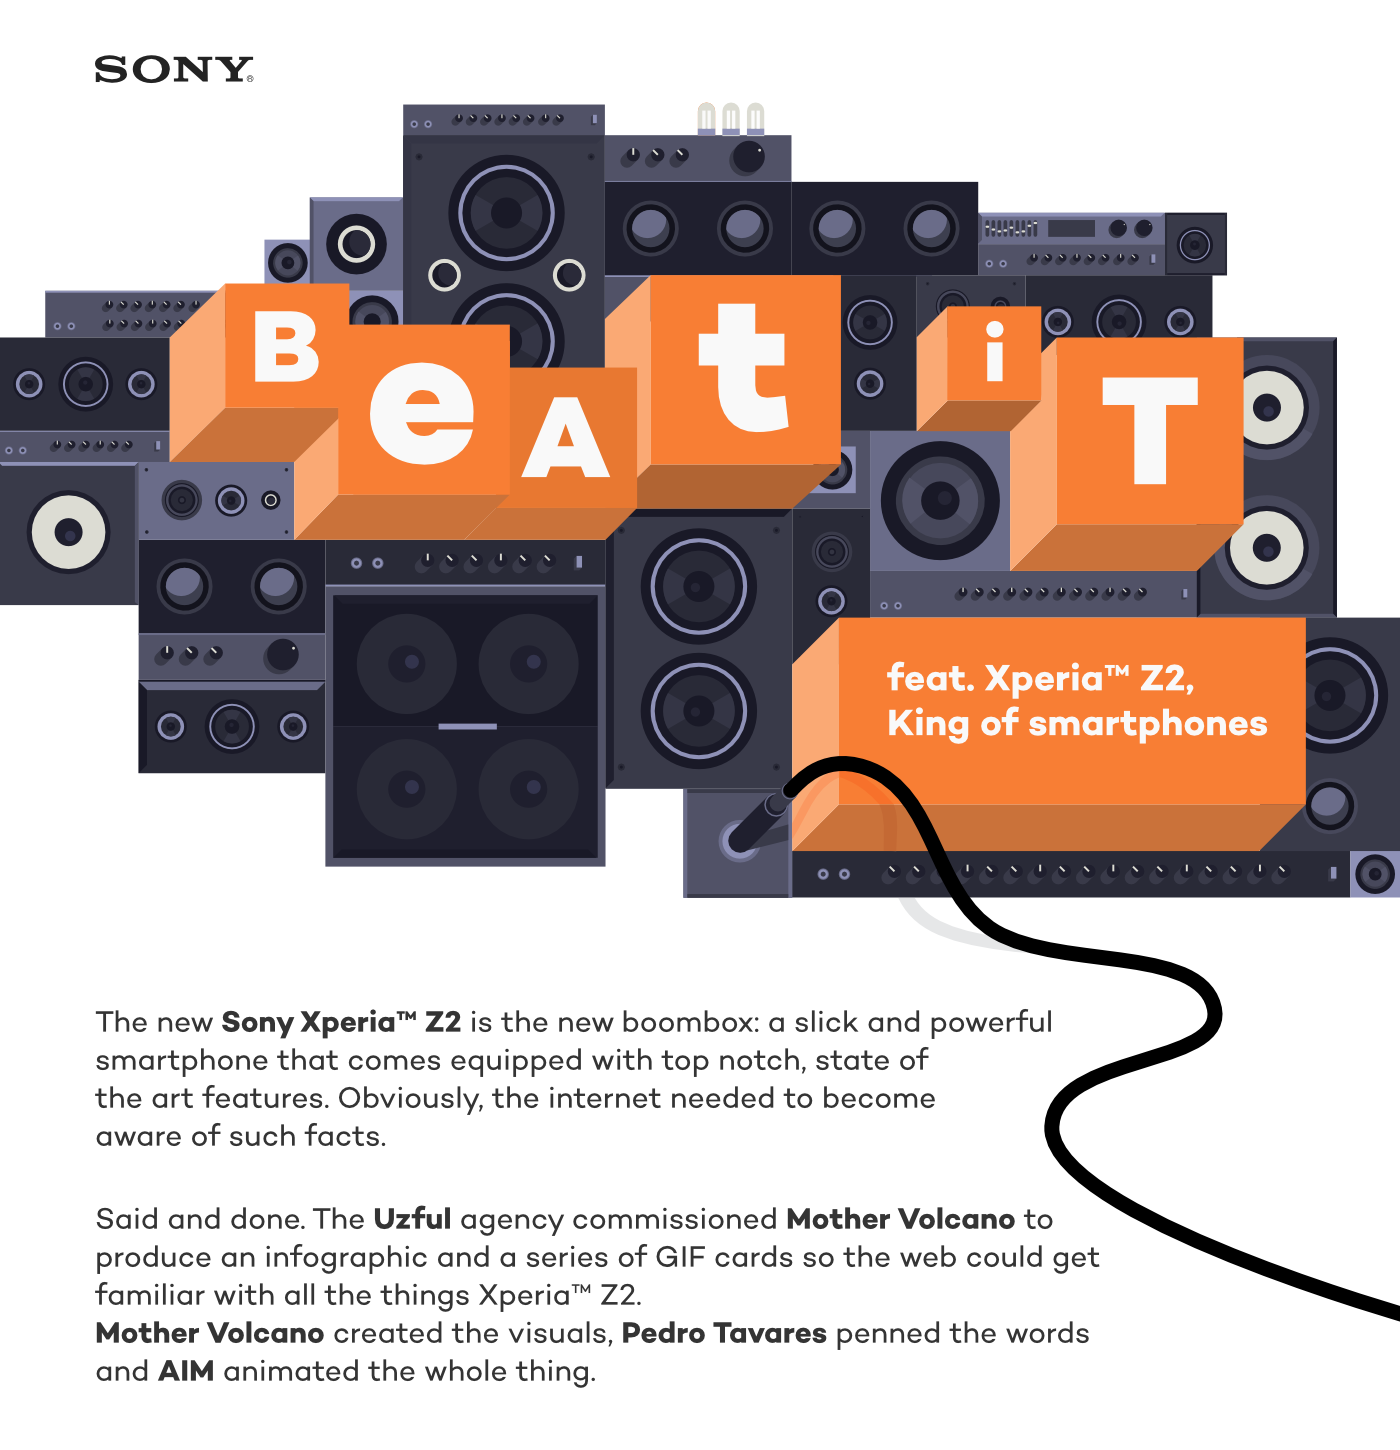 Sony Beat It Michael Jackson Katy Perry skrillex smartphone Z2 xperia noise cancelling daft punk animated gif Britney Spears gif infographic animated illustration